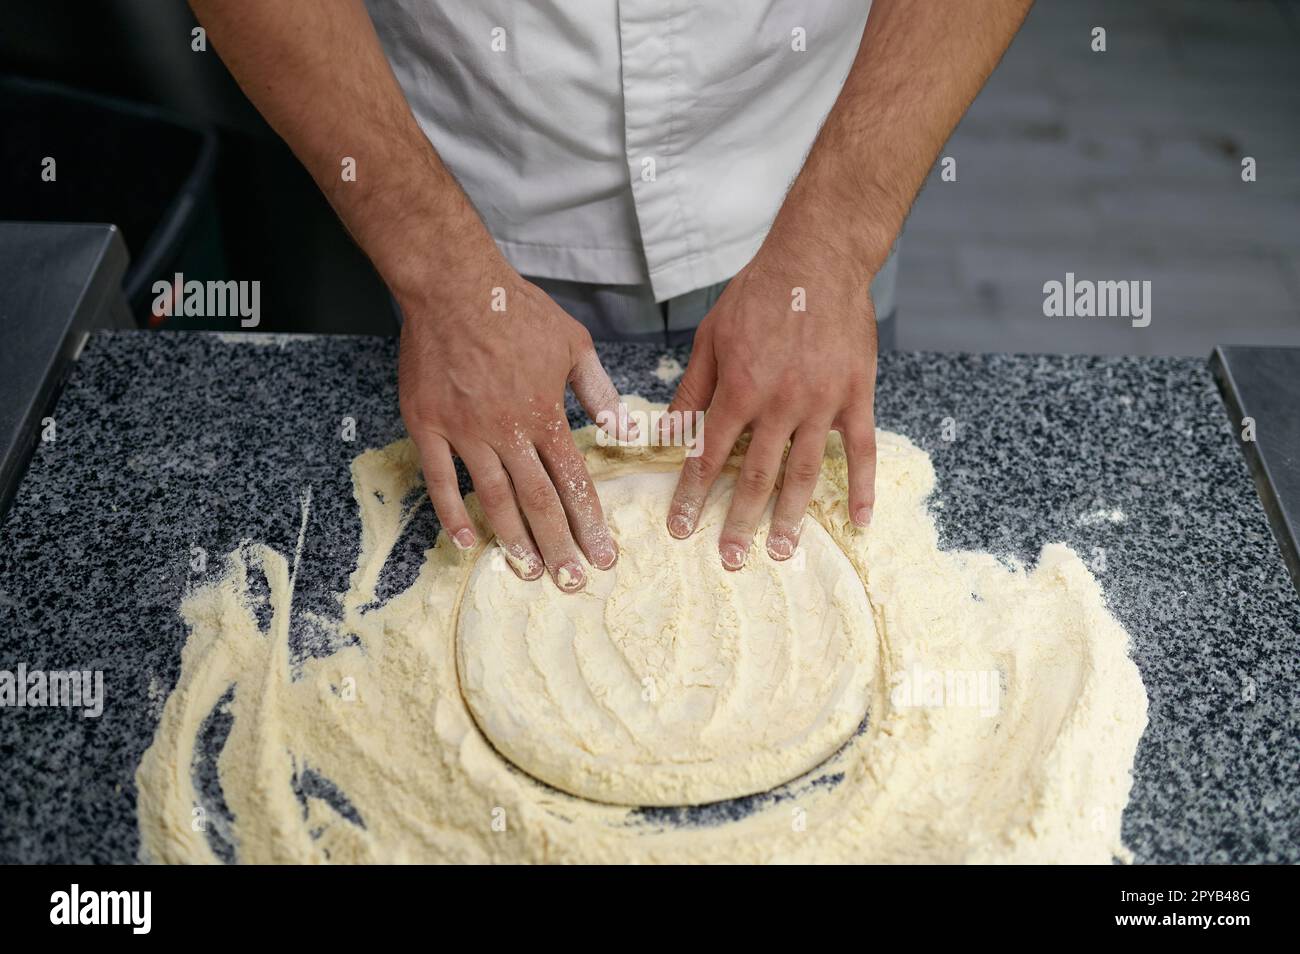 Midsection of man chef preparing food at professional kitchen Stock Photo